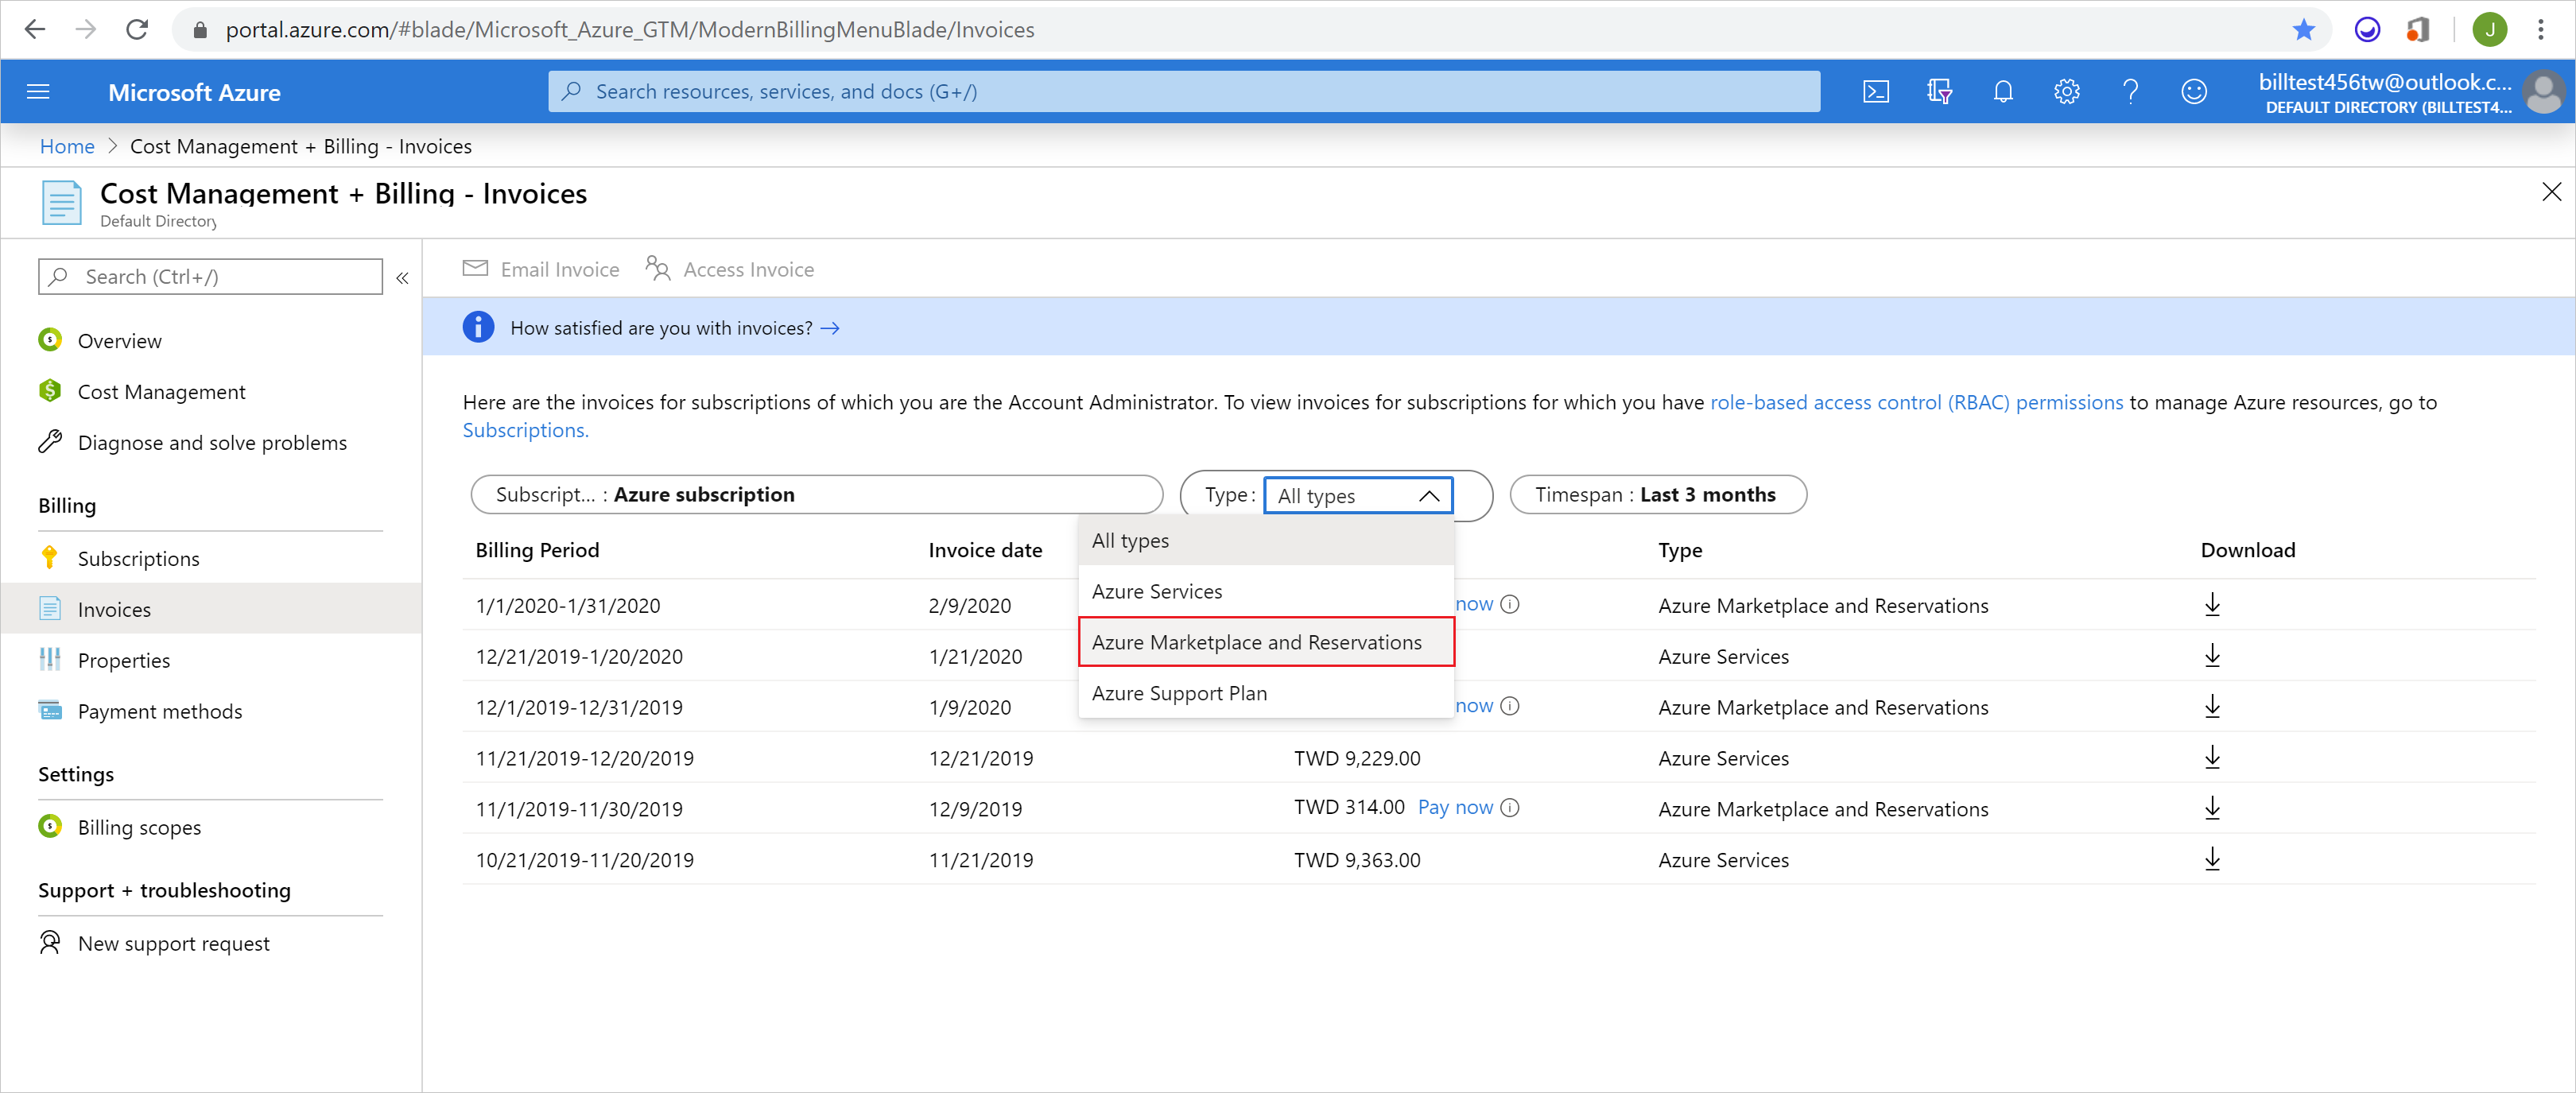 screenshot of Type filter selected, showing Azure Marketplace and Reservation selected in the drop-down